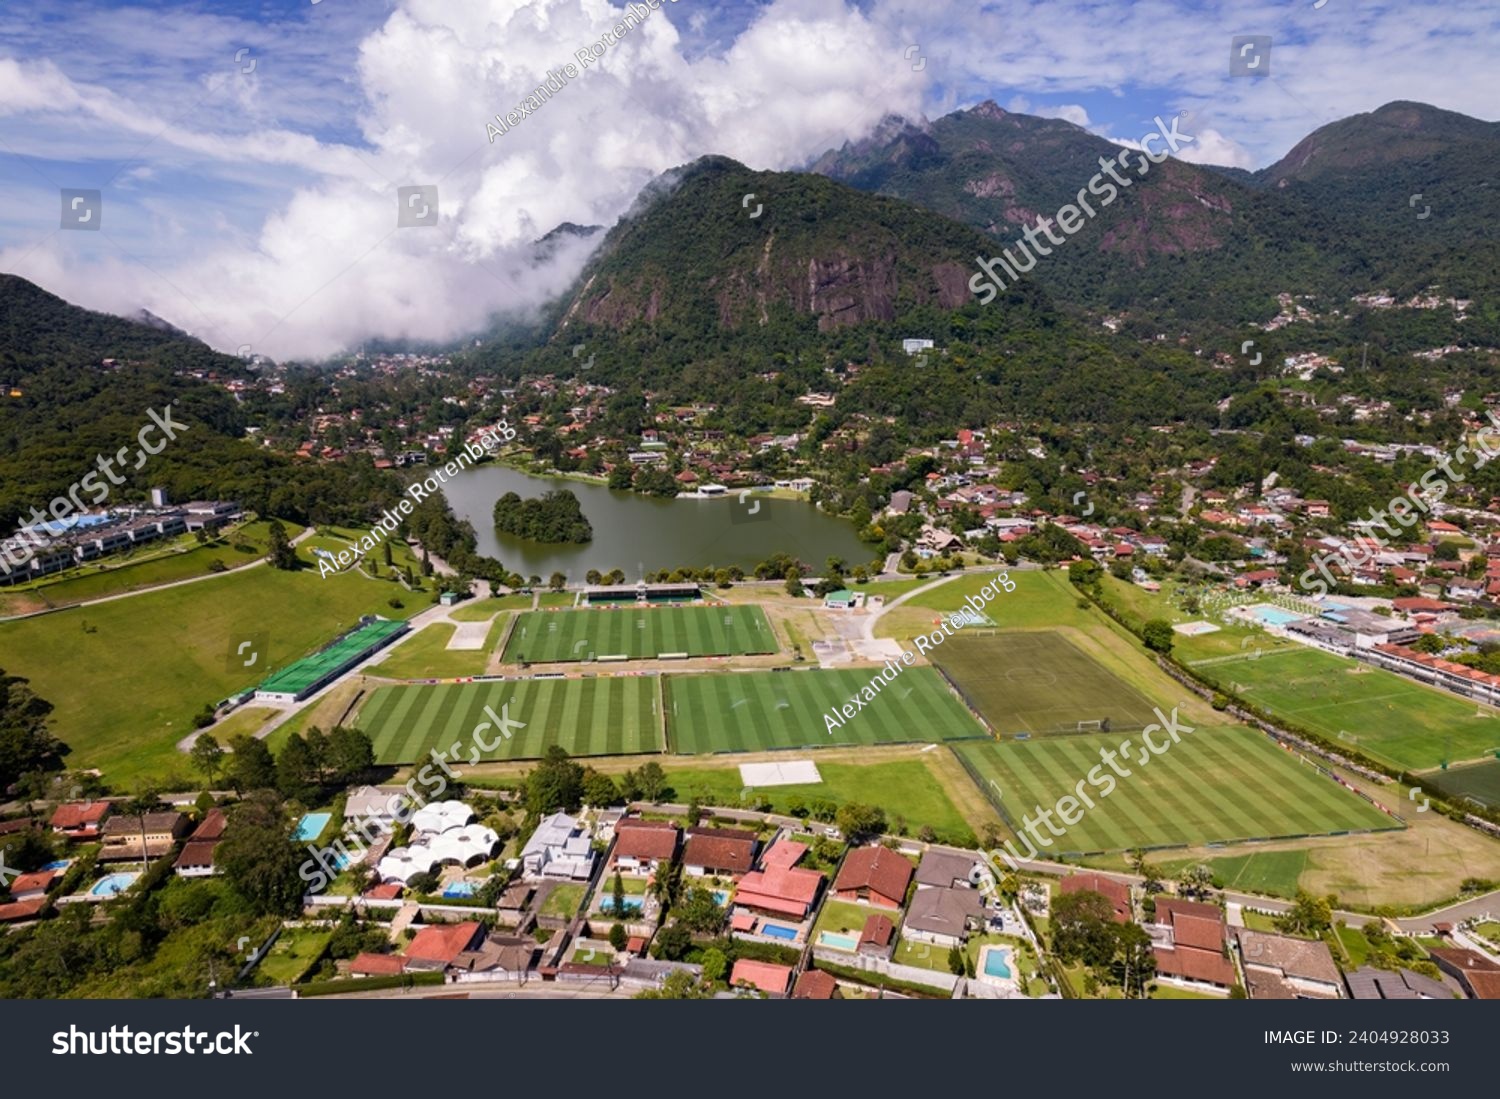 Aerial drone view of the city of Granja Comary in Teresopolis, the headquarters and main training center of the Brazil national football team #2404928033